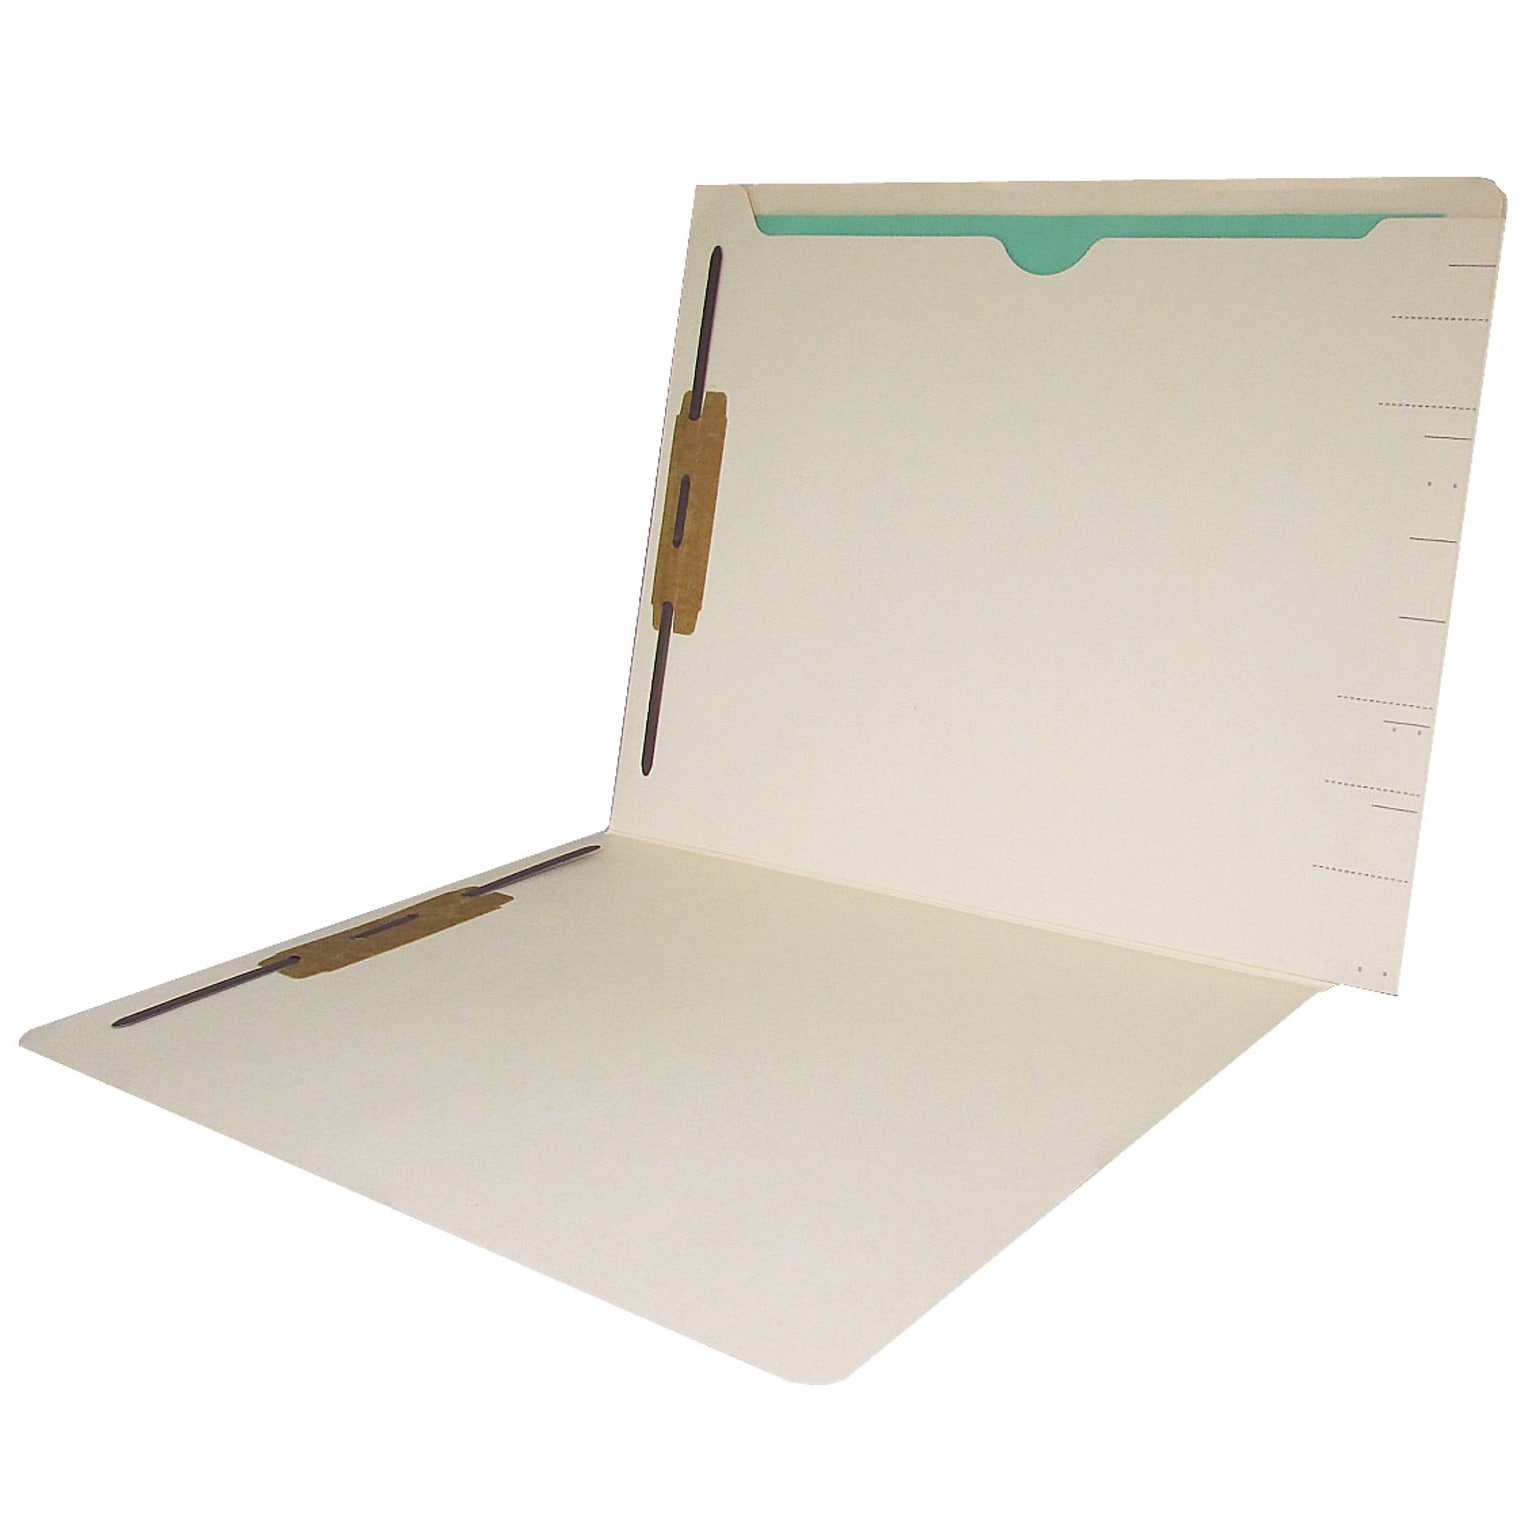 Medical Arts Press® End-Tab Confidential File Folders with Full Back Pocket, 2-Fasteners, Letter, Manila, 50/Bx (31315)